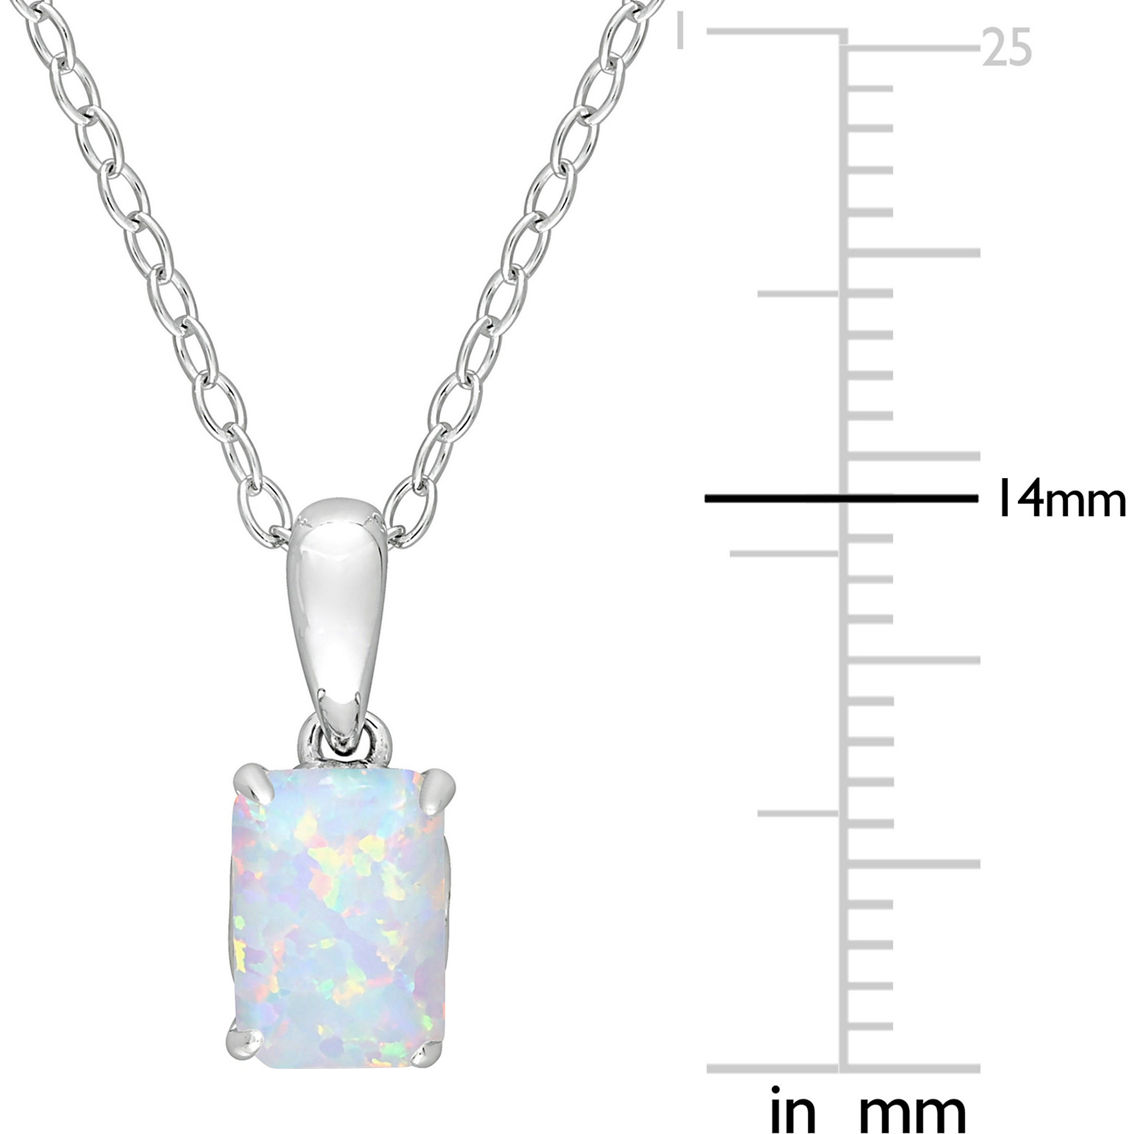 Sofia B. Sterling Silver Emerald Cut Lab Created Opal Pendant and Earring 2 pc. Set - Image 4 of 4